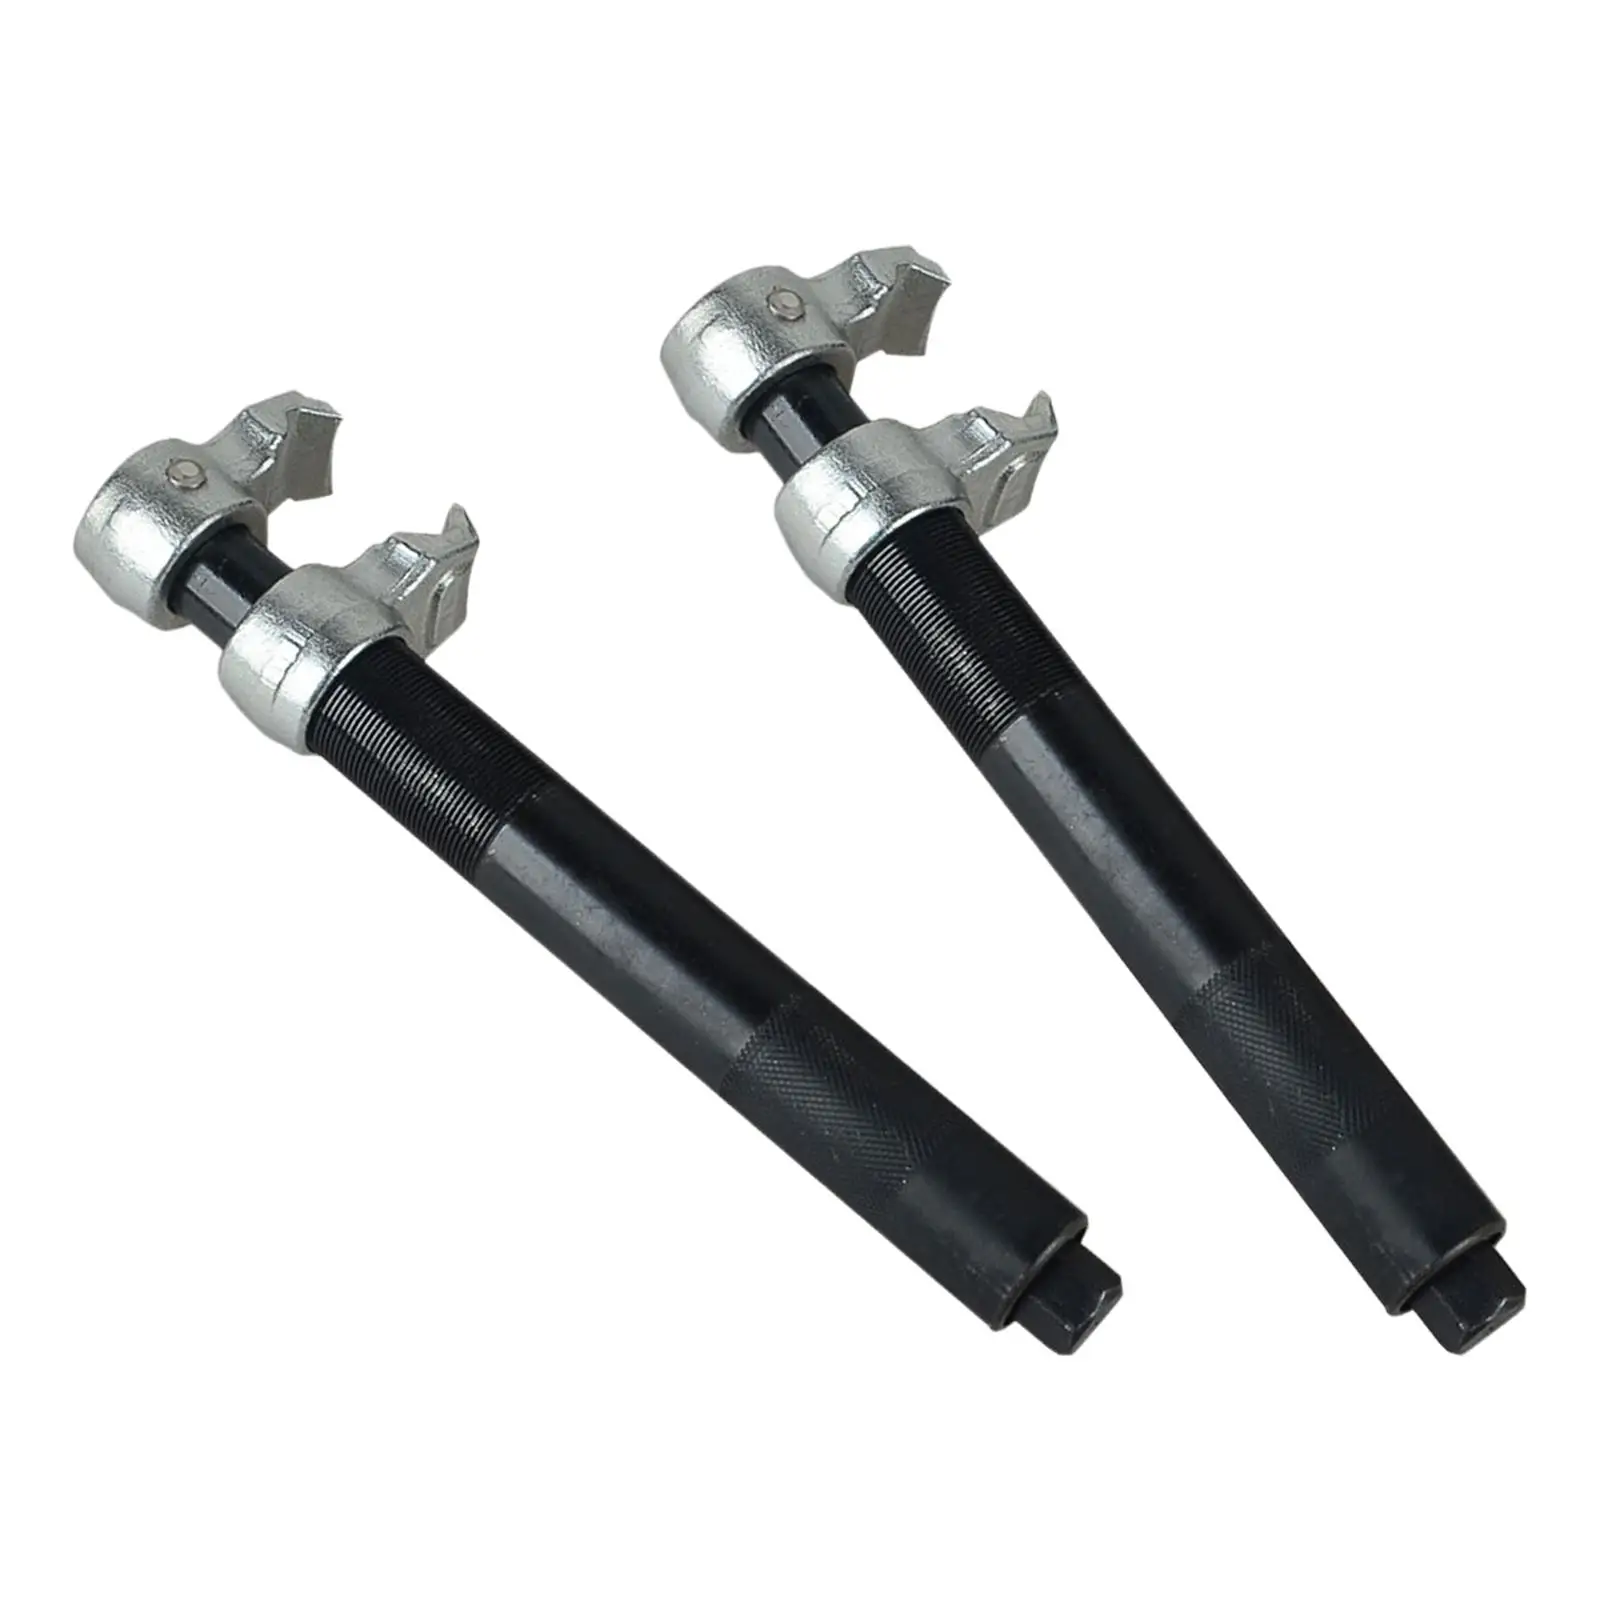 Compressor Adjustable with 2 Steel Jaw Claws Premium Replaces